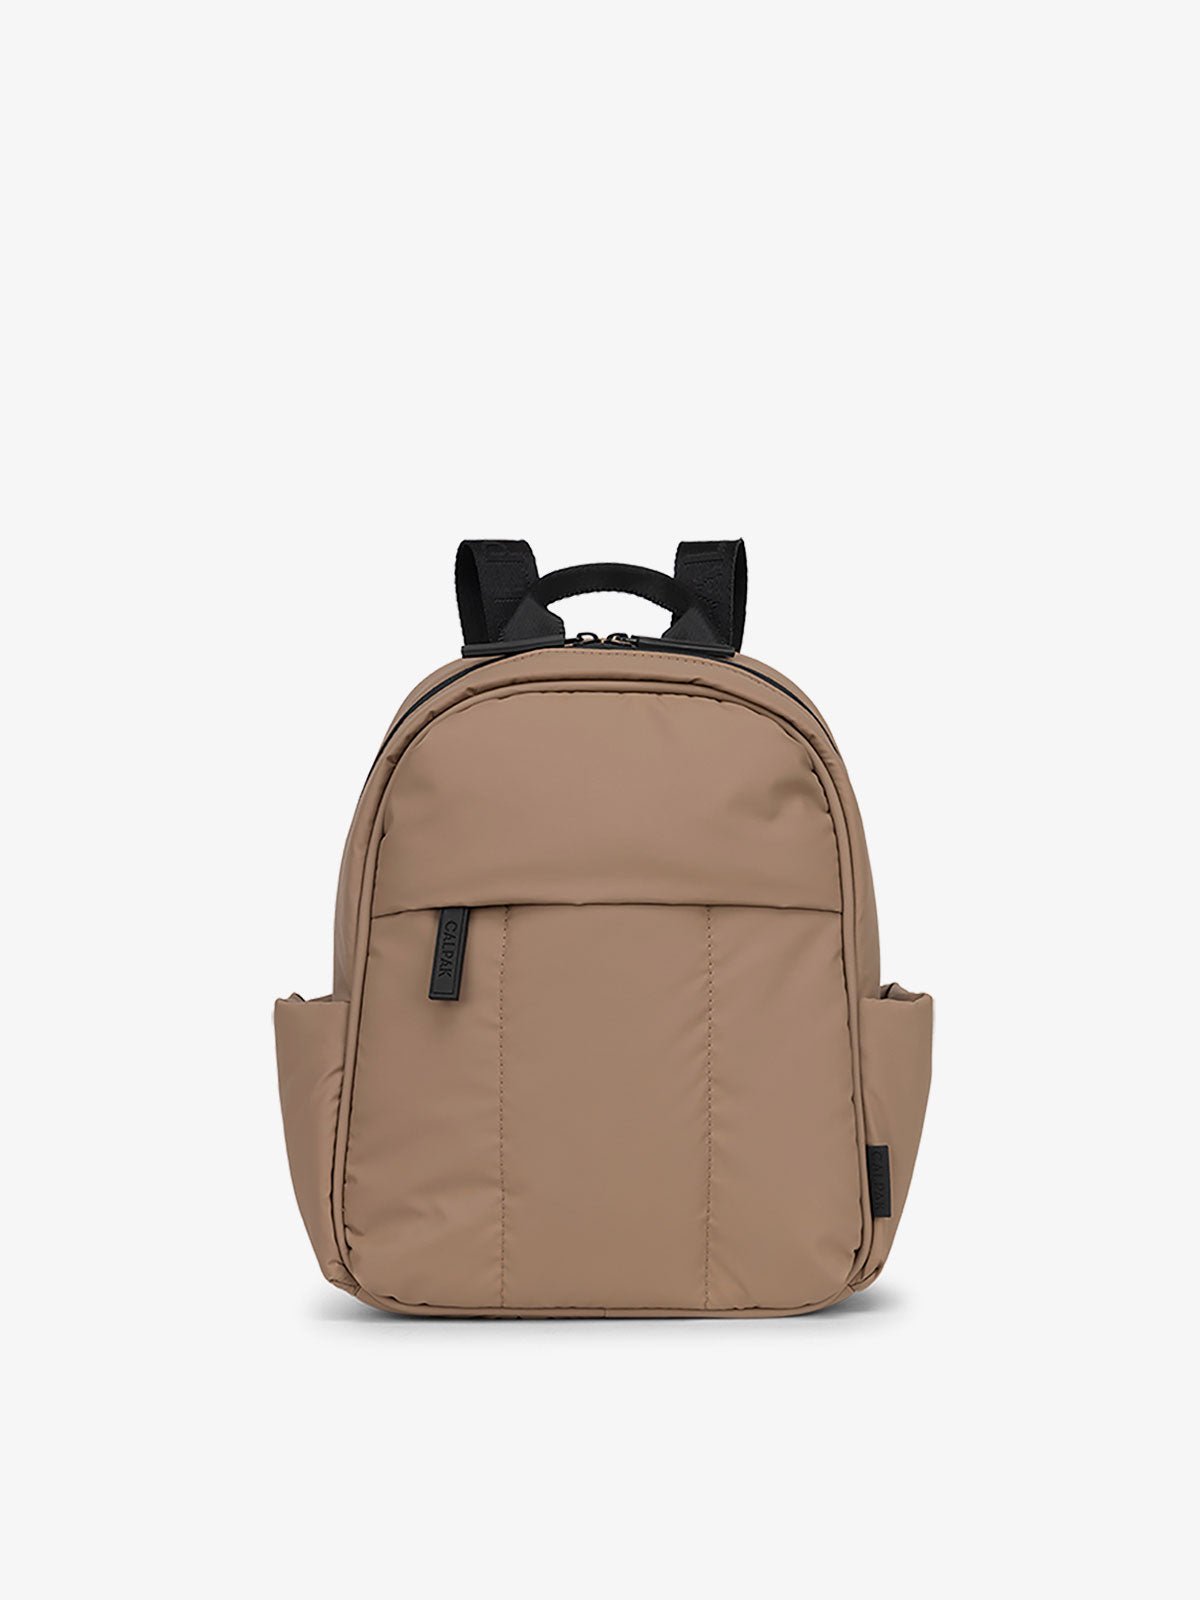 CALPAK Luka Mini Backpack for essentials for everyday use in brown